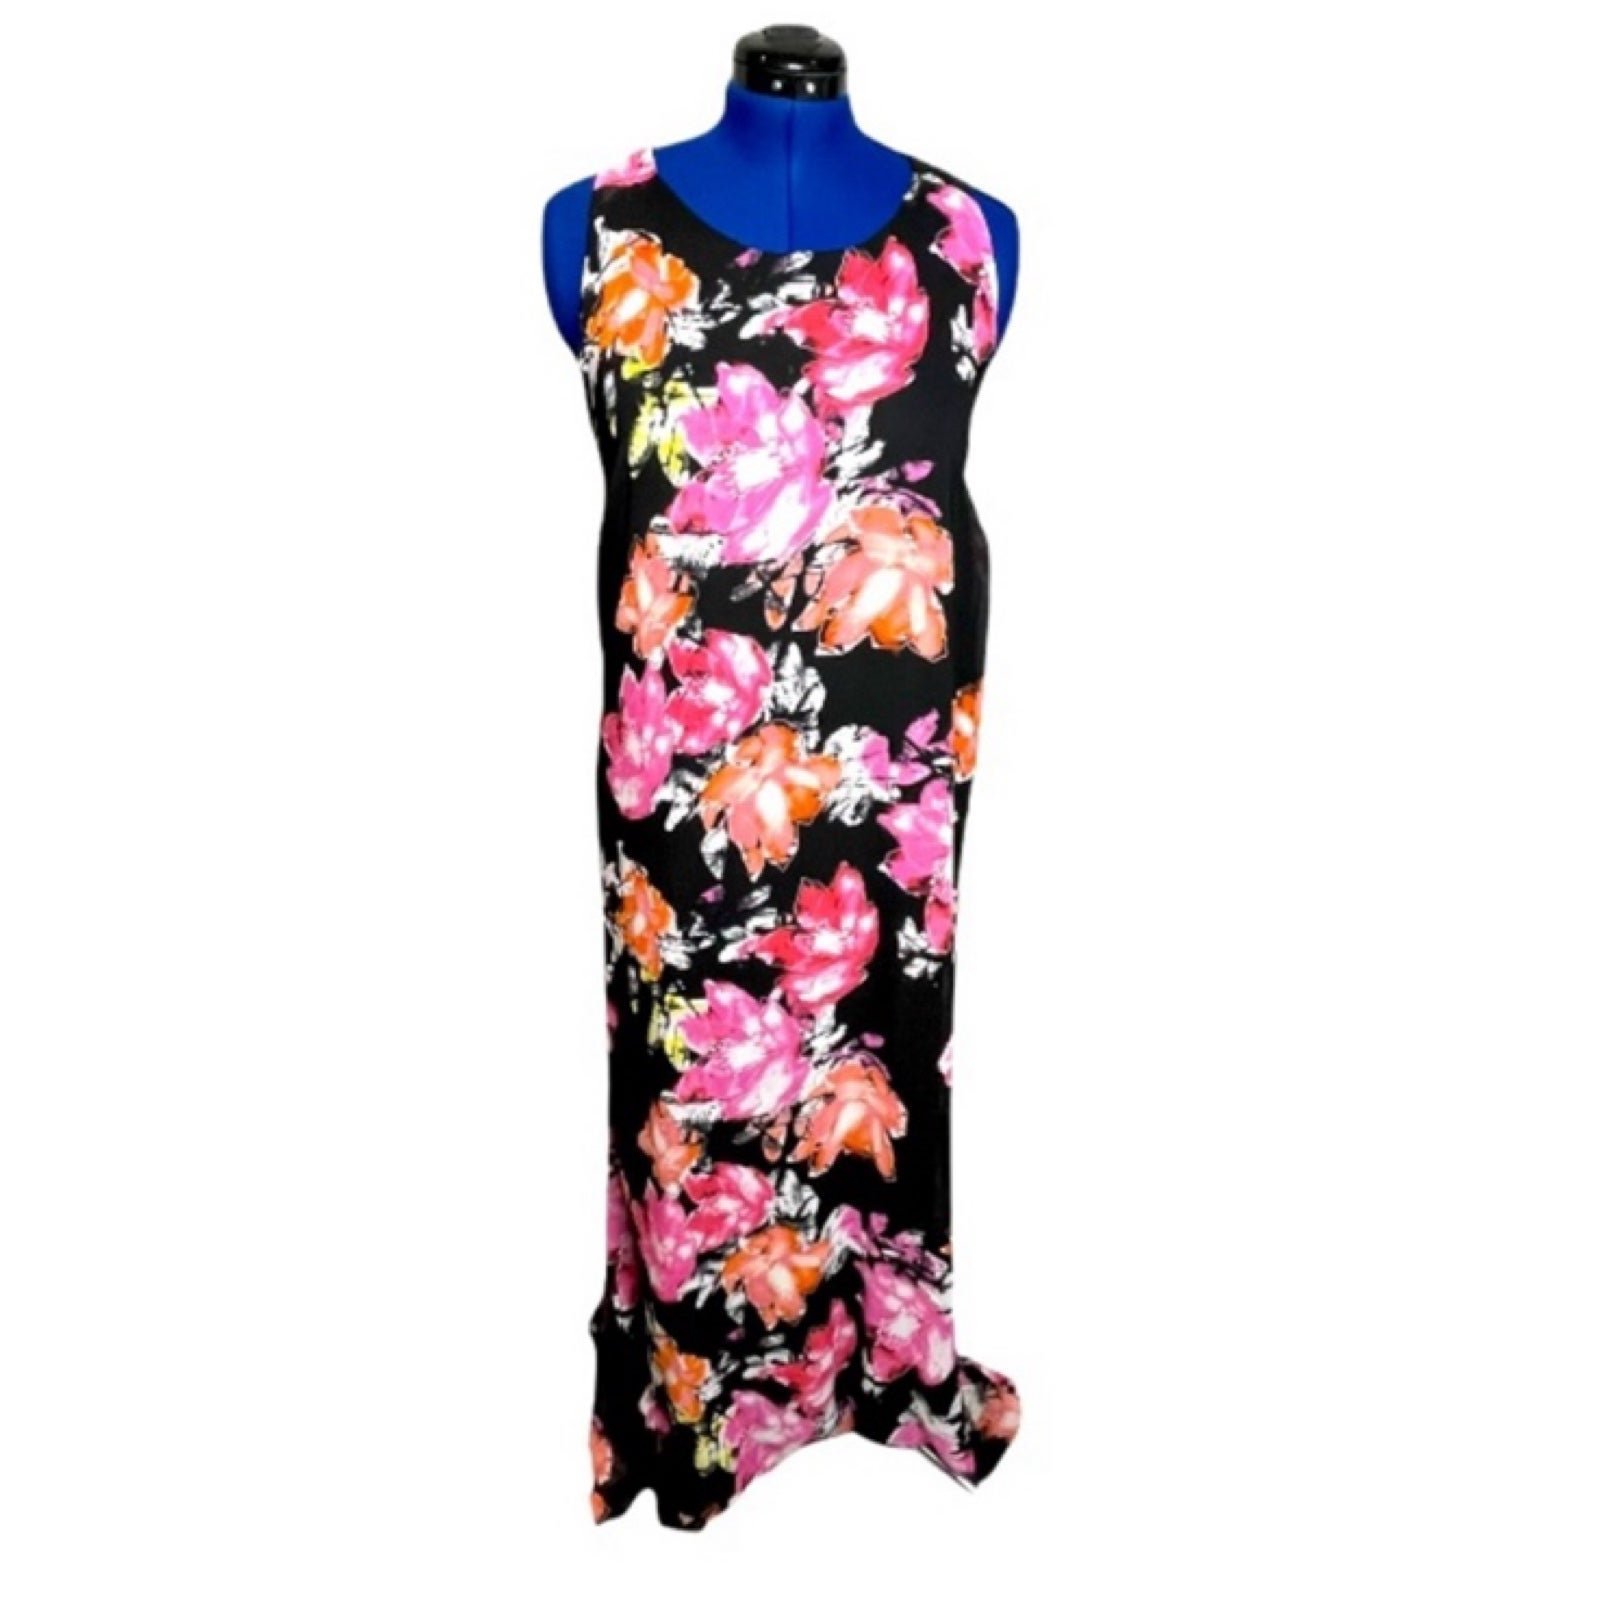 Gorgeous Simply Be US28 black bright floral racer back detail layered vacation maxi dress fLMyuvlI6 well sale